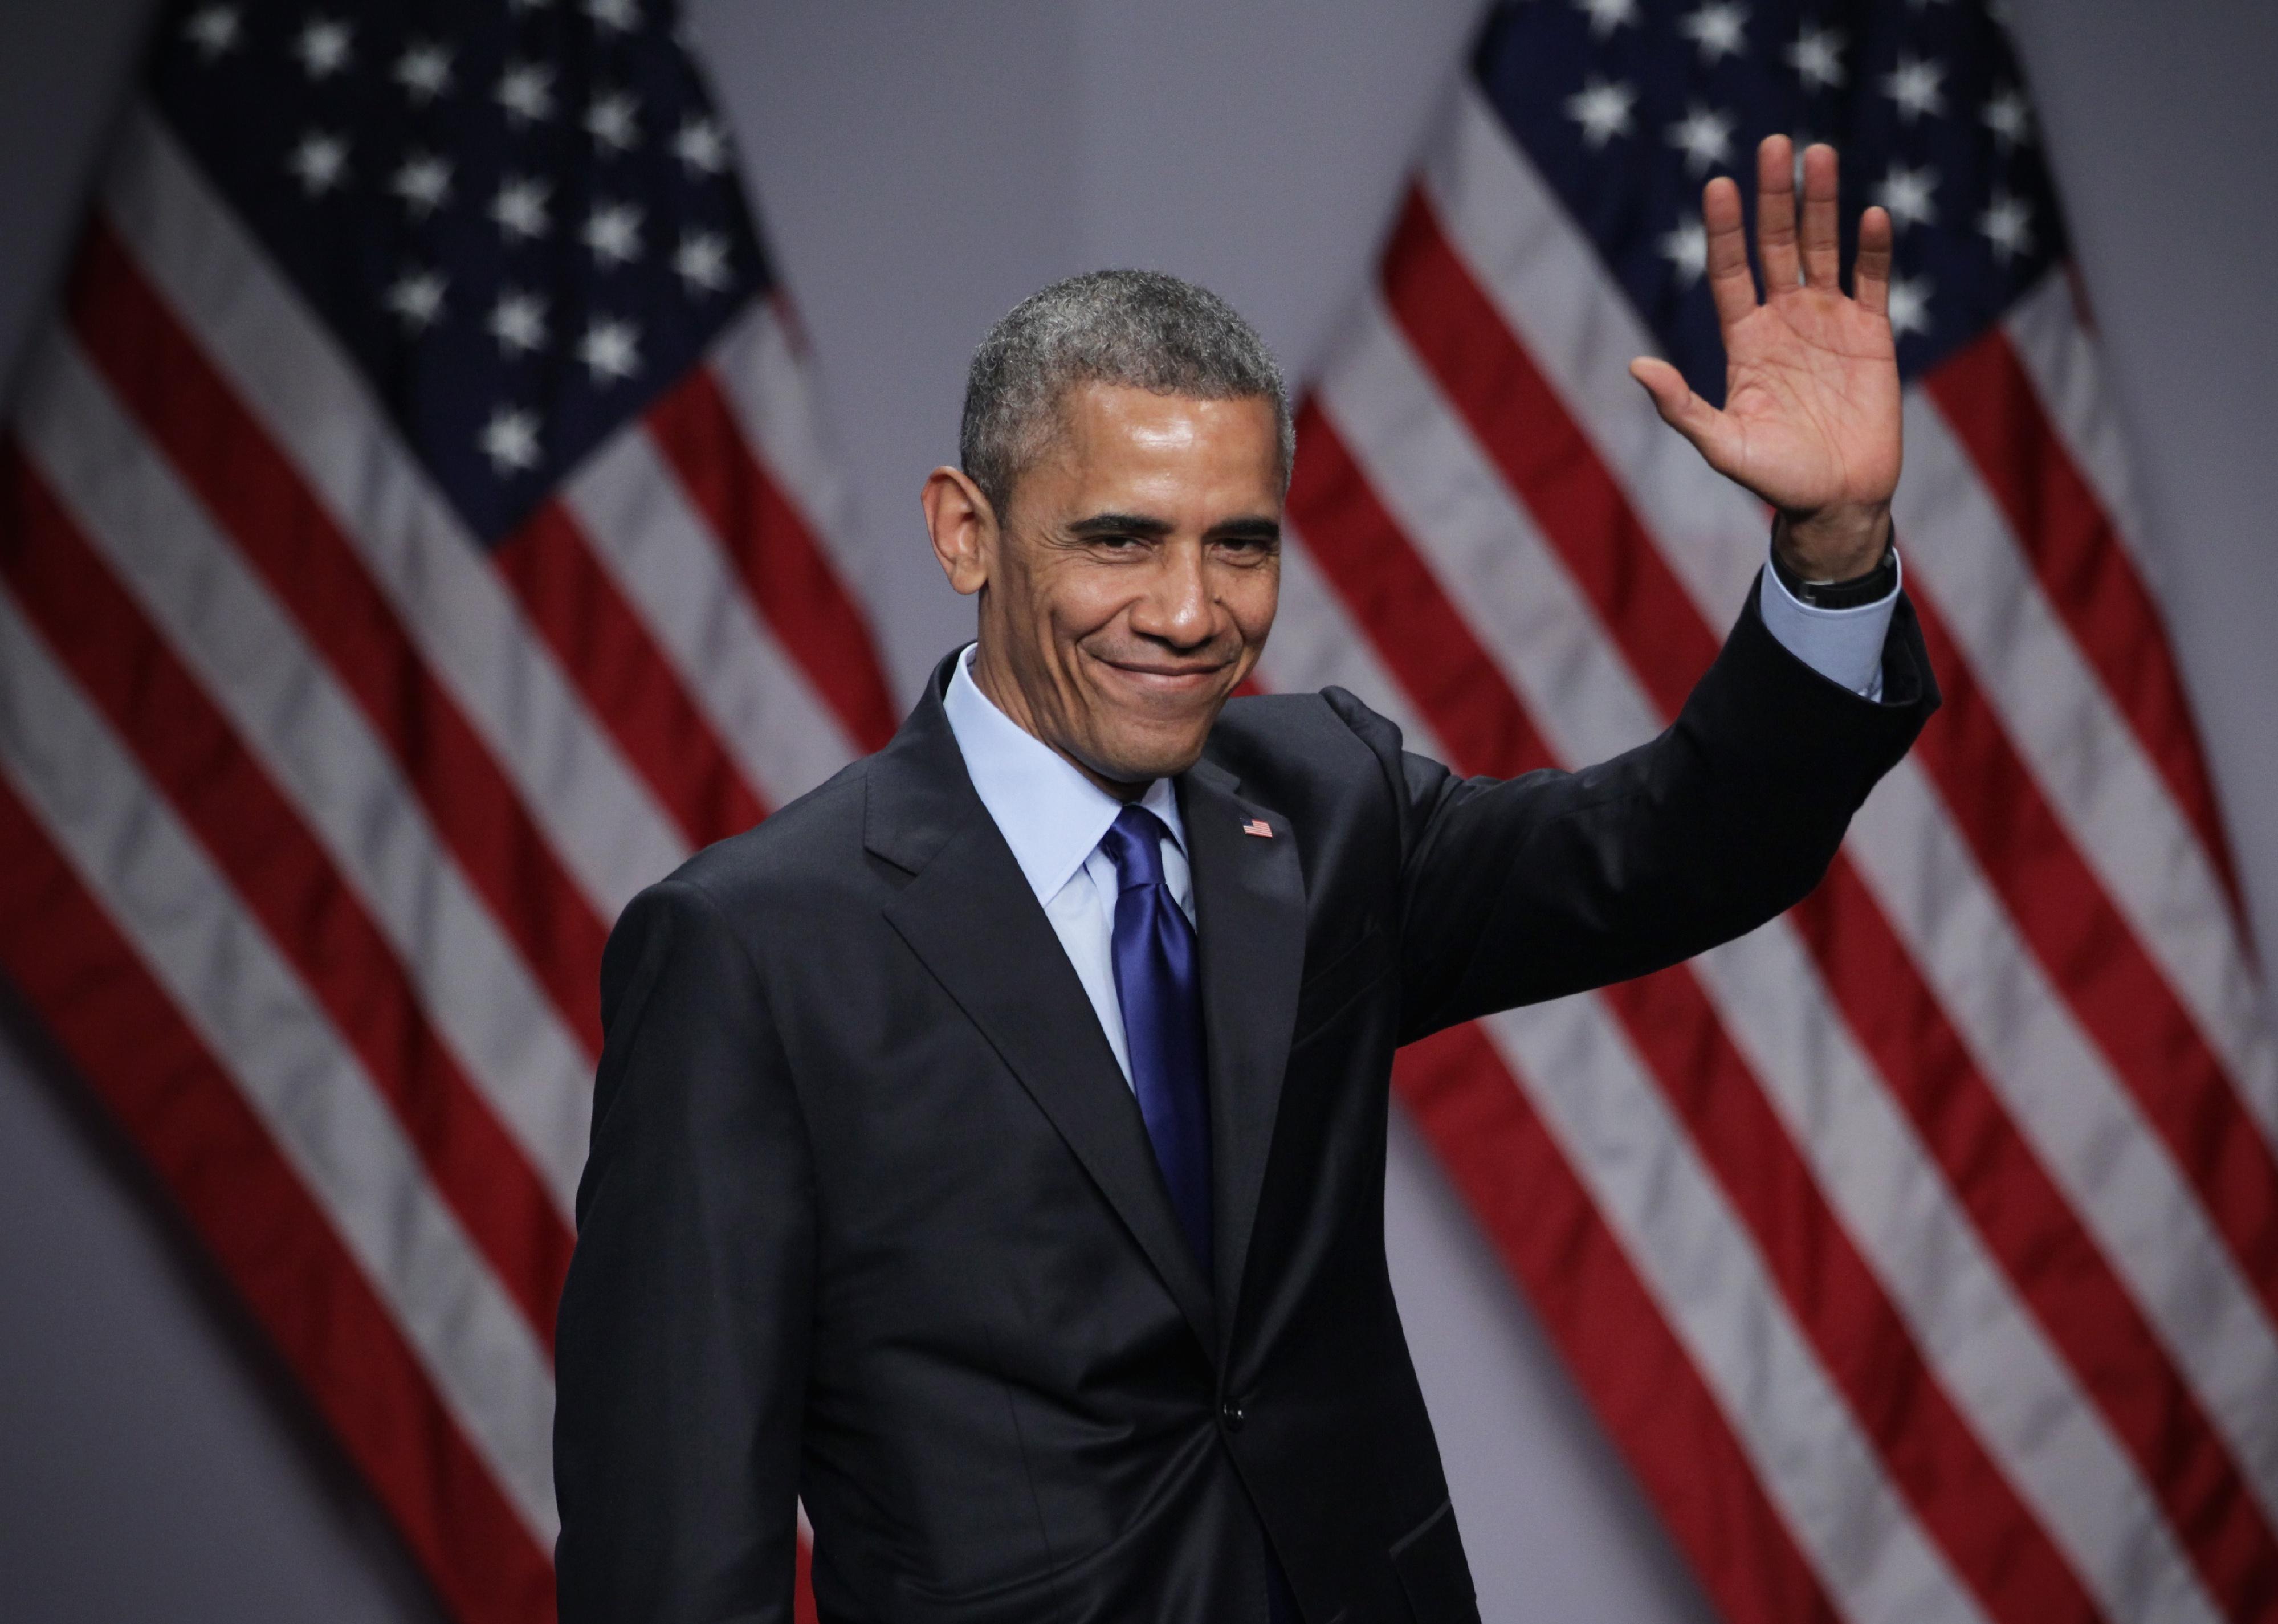 Barack Obama waving onstage in front of two American flags.